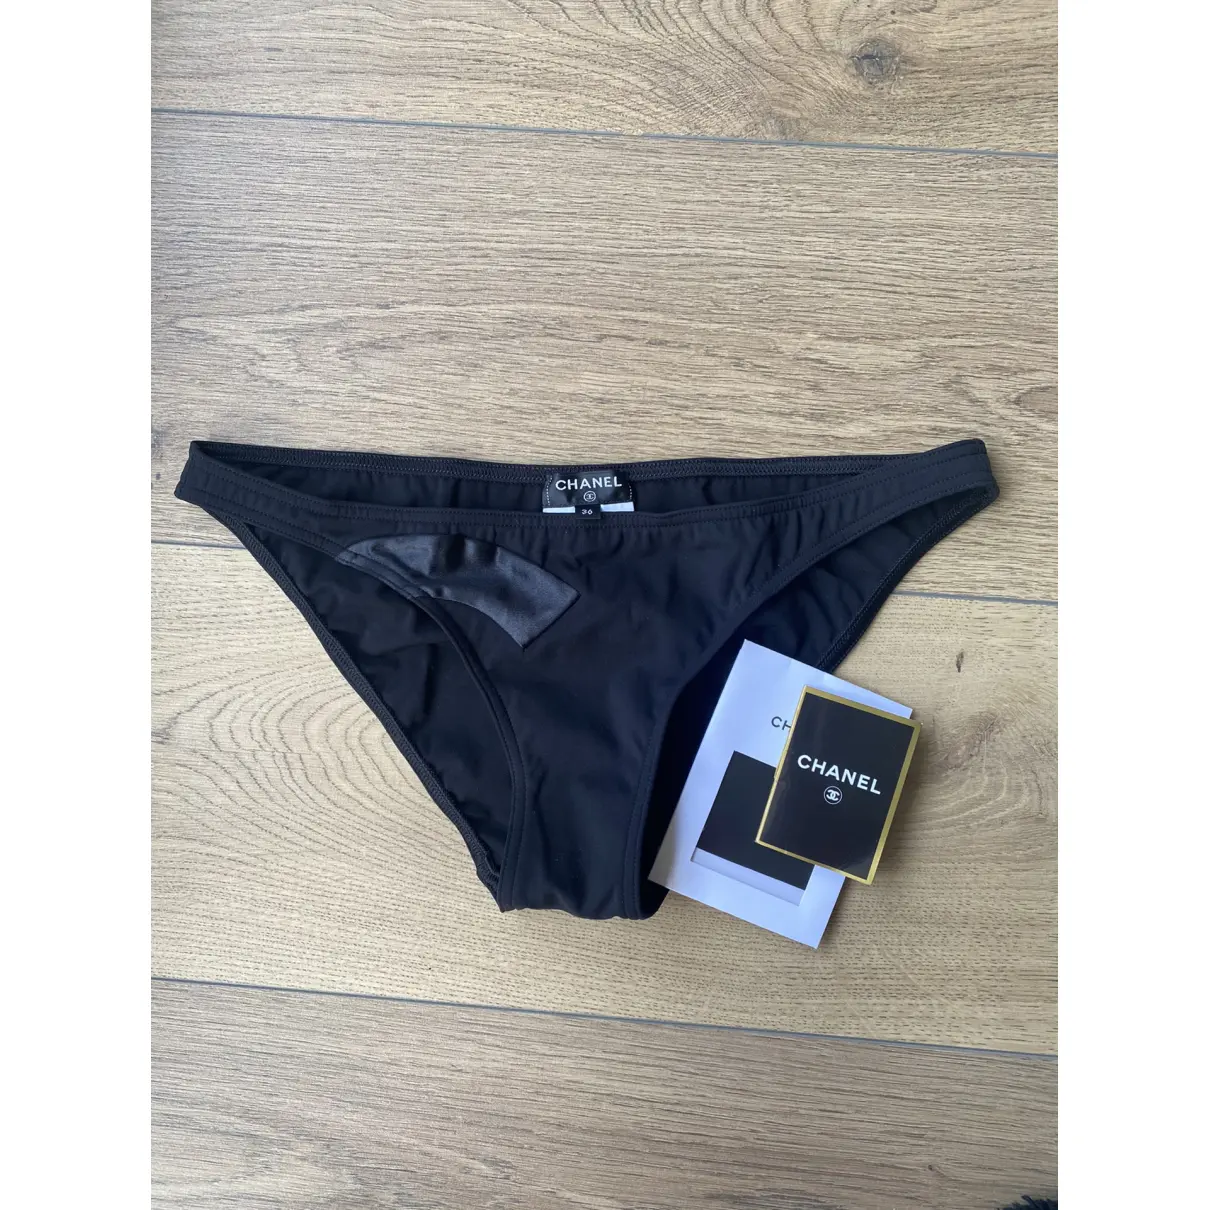 Buy Chanel Two-piece swimsuit online